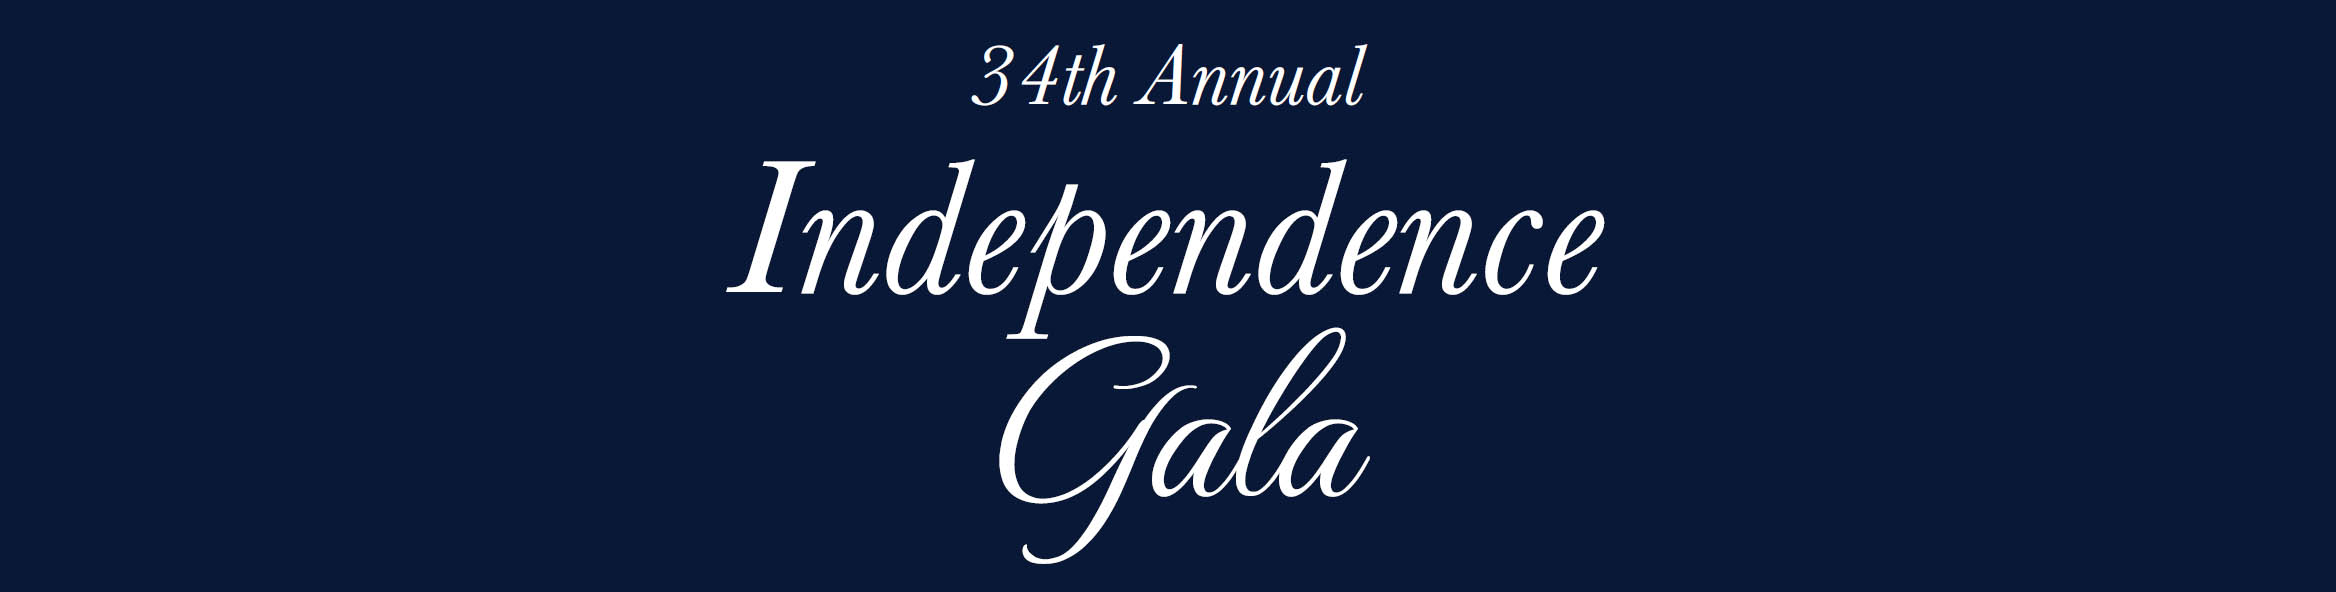 34th Annual Independence Gala